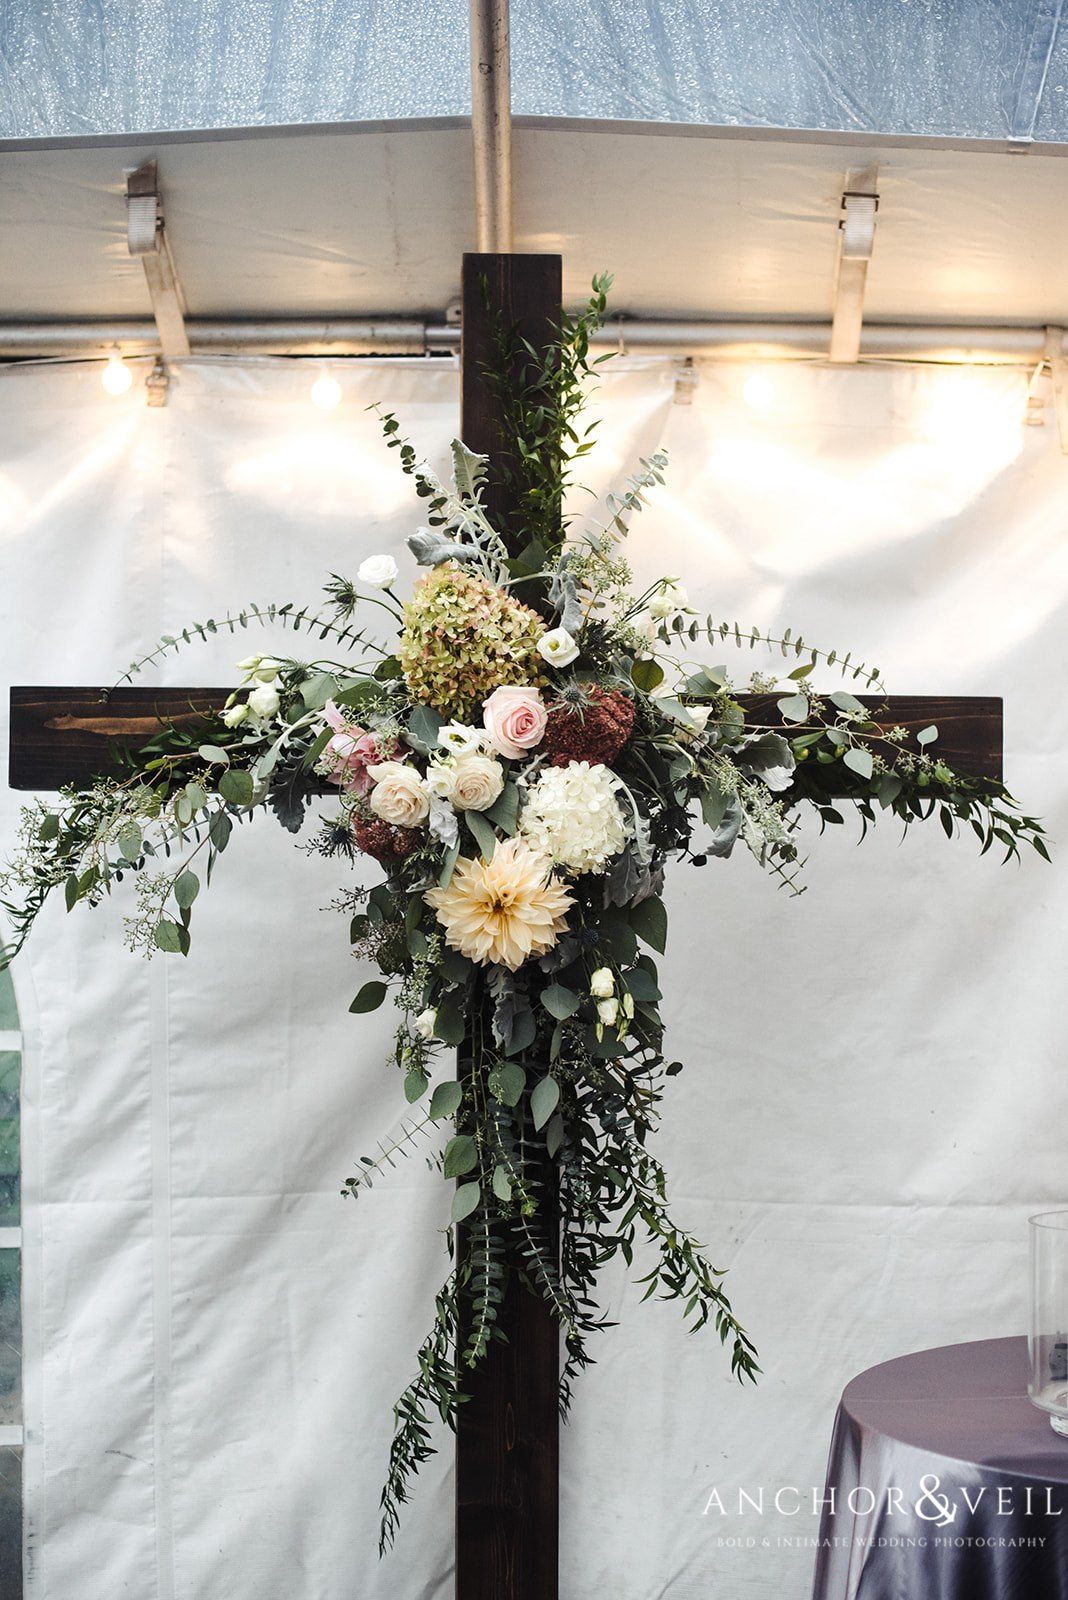 The alter flowers at the Beech Mountain Ski Resort Wedding